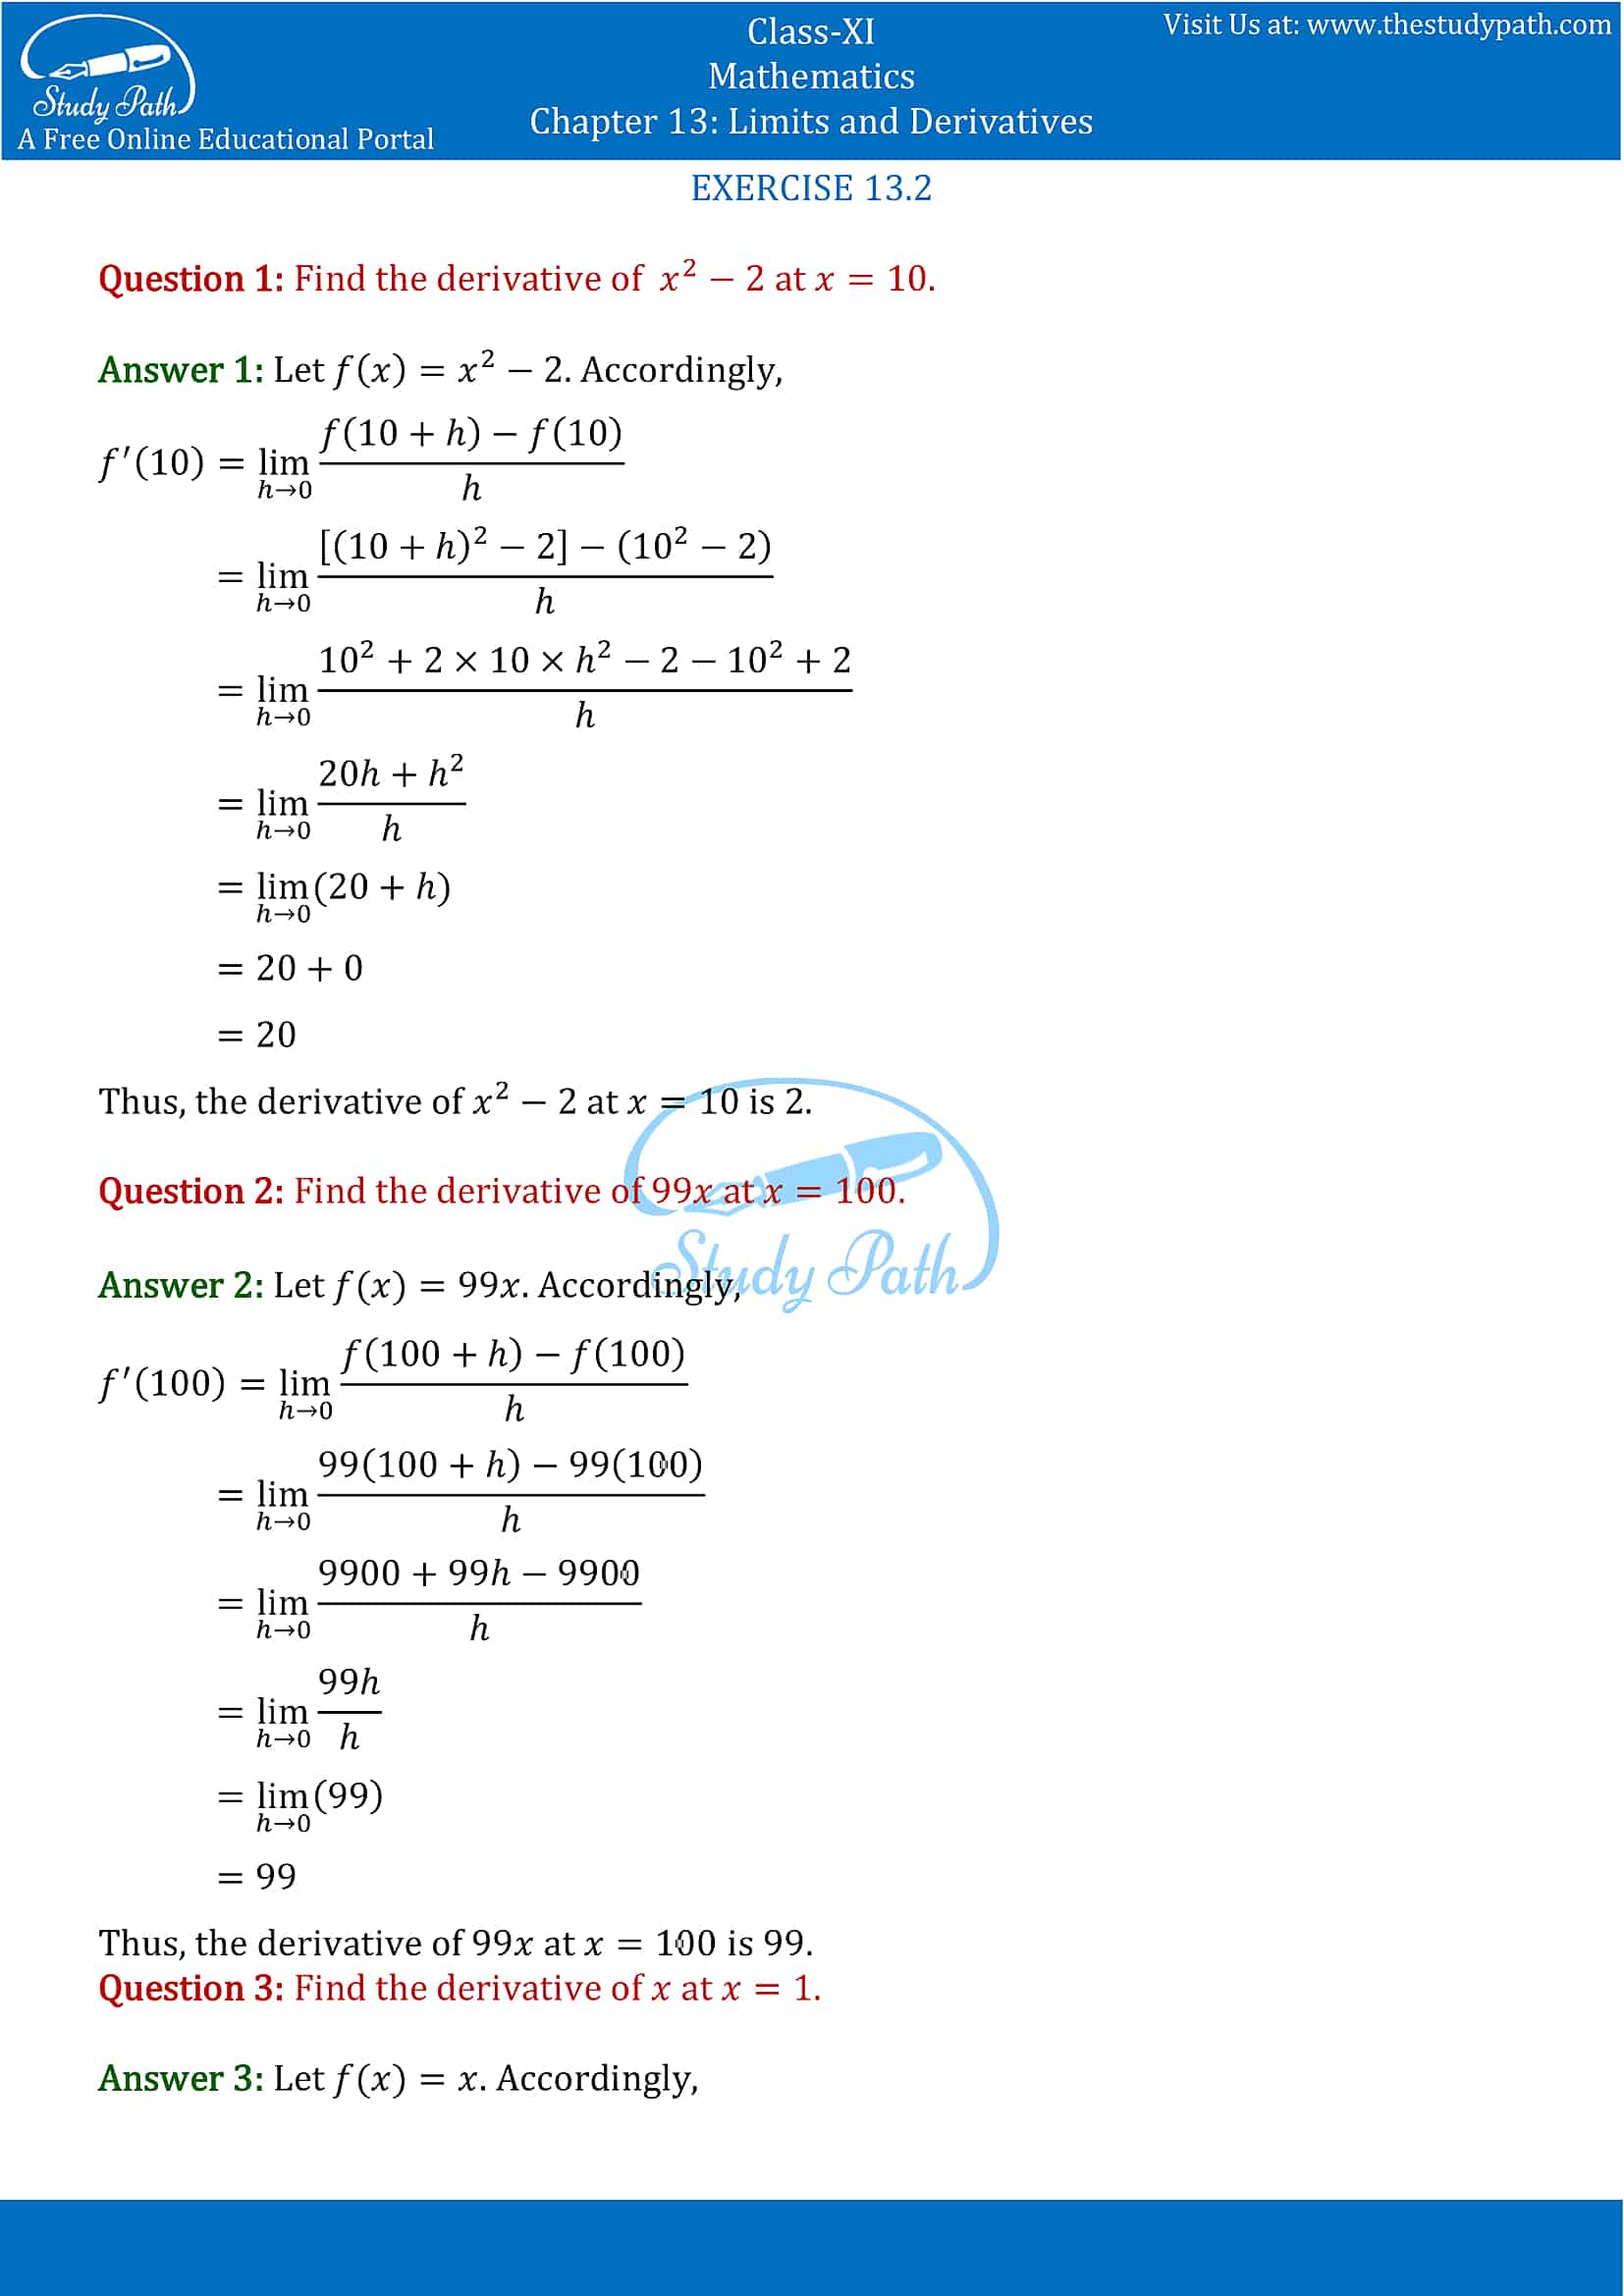 NCERT Solutions for Class 11 Maths chapter 13 Limits and Derivatives Exercise 13.2 Part-1